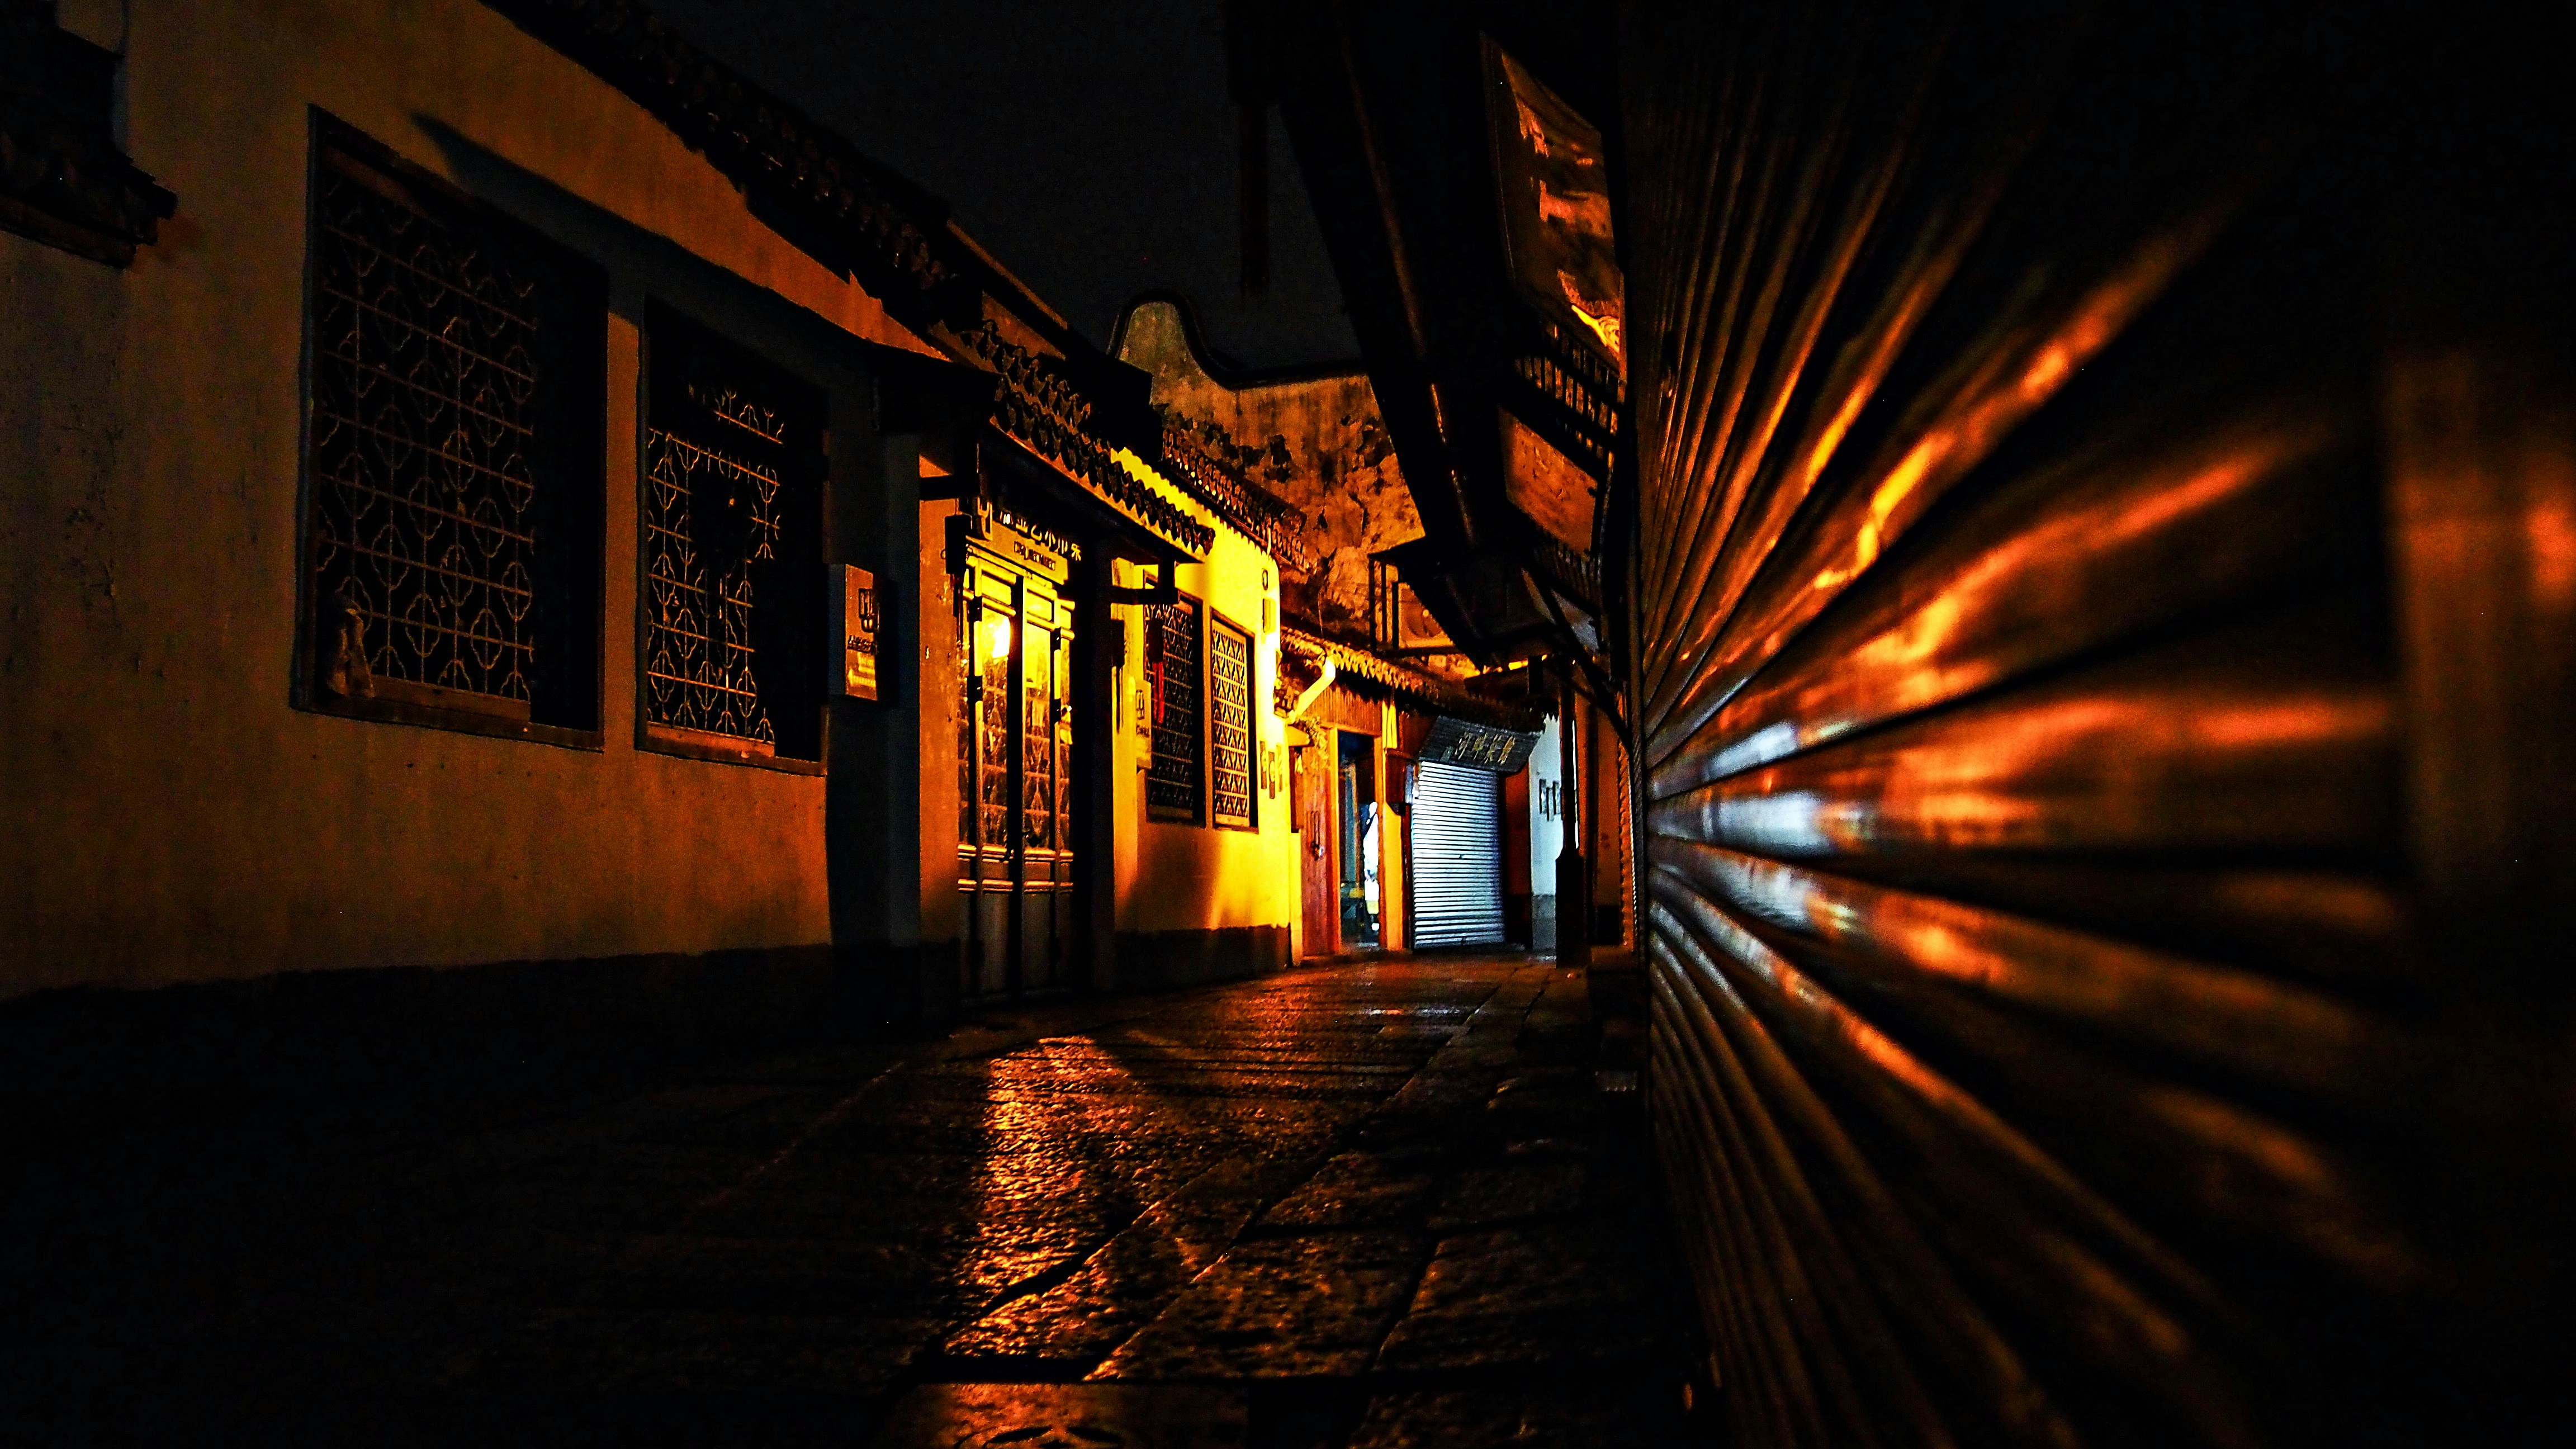 Went to visit this ancient city just outside of Shanghai, China. The light was beautiful and the food here is amazing